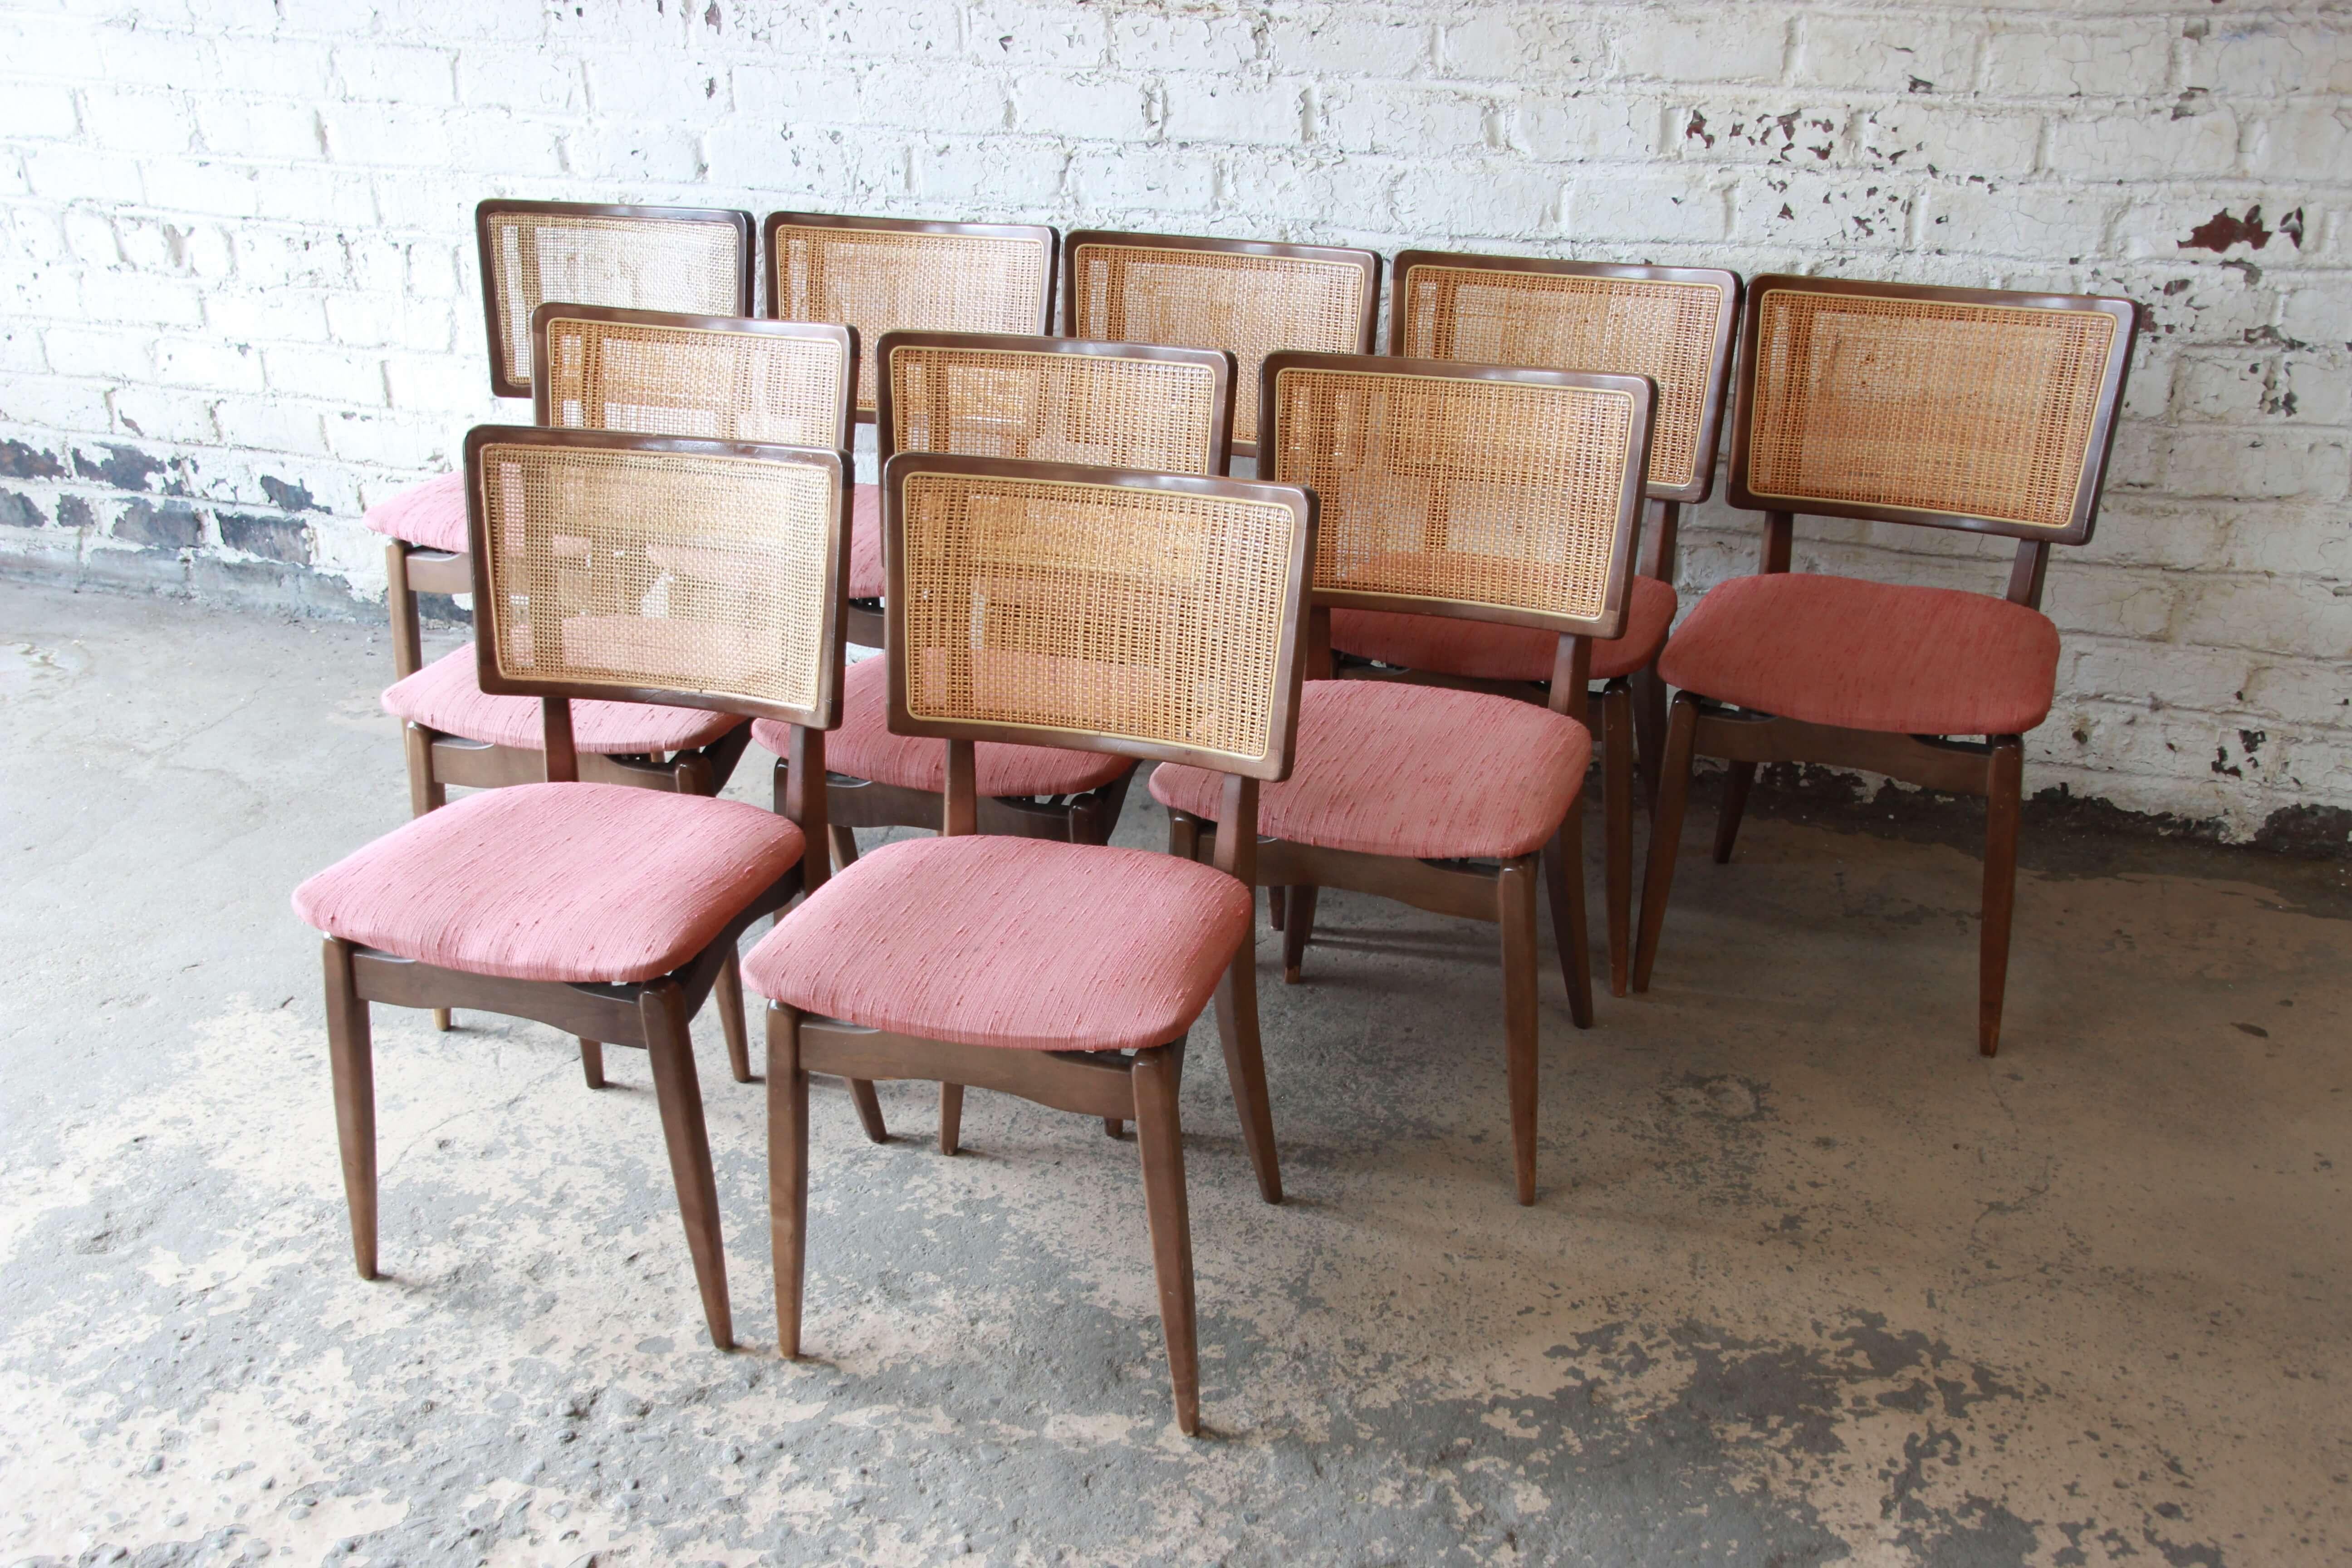 stakmore folding chairs 1926